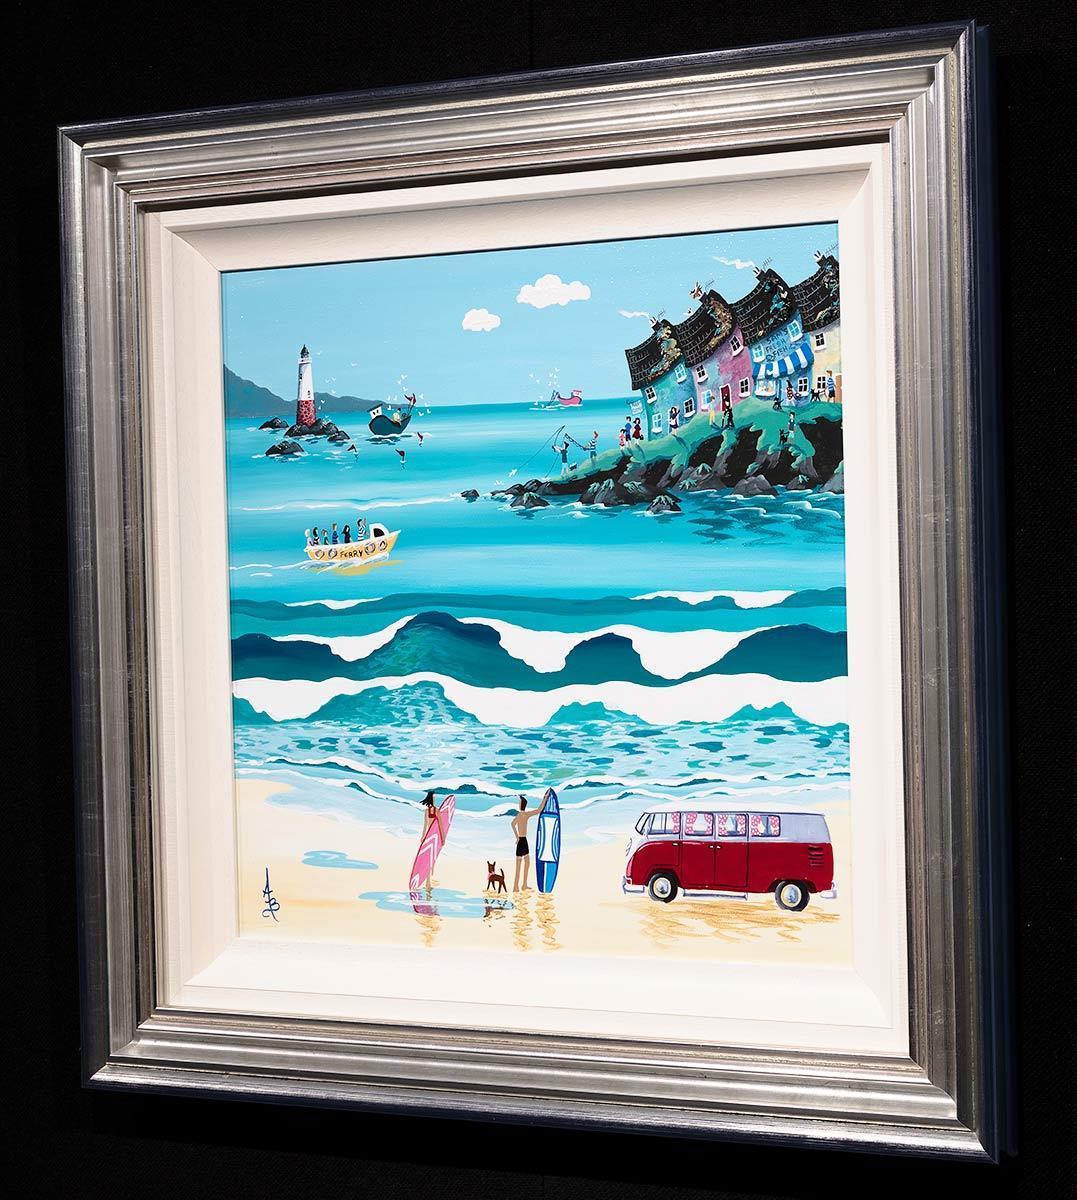 Great Day For A Surf - Original Anne Blundell